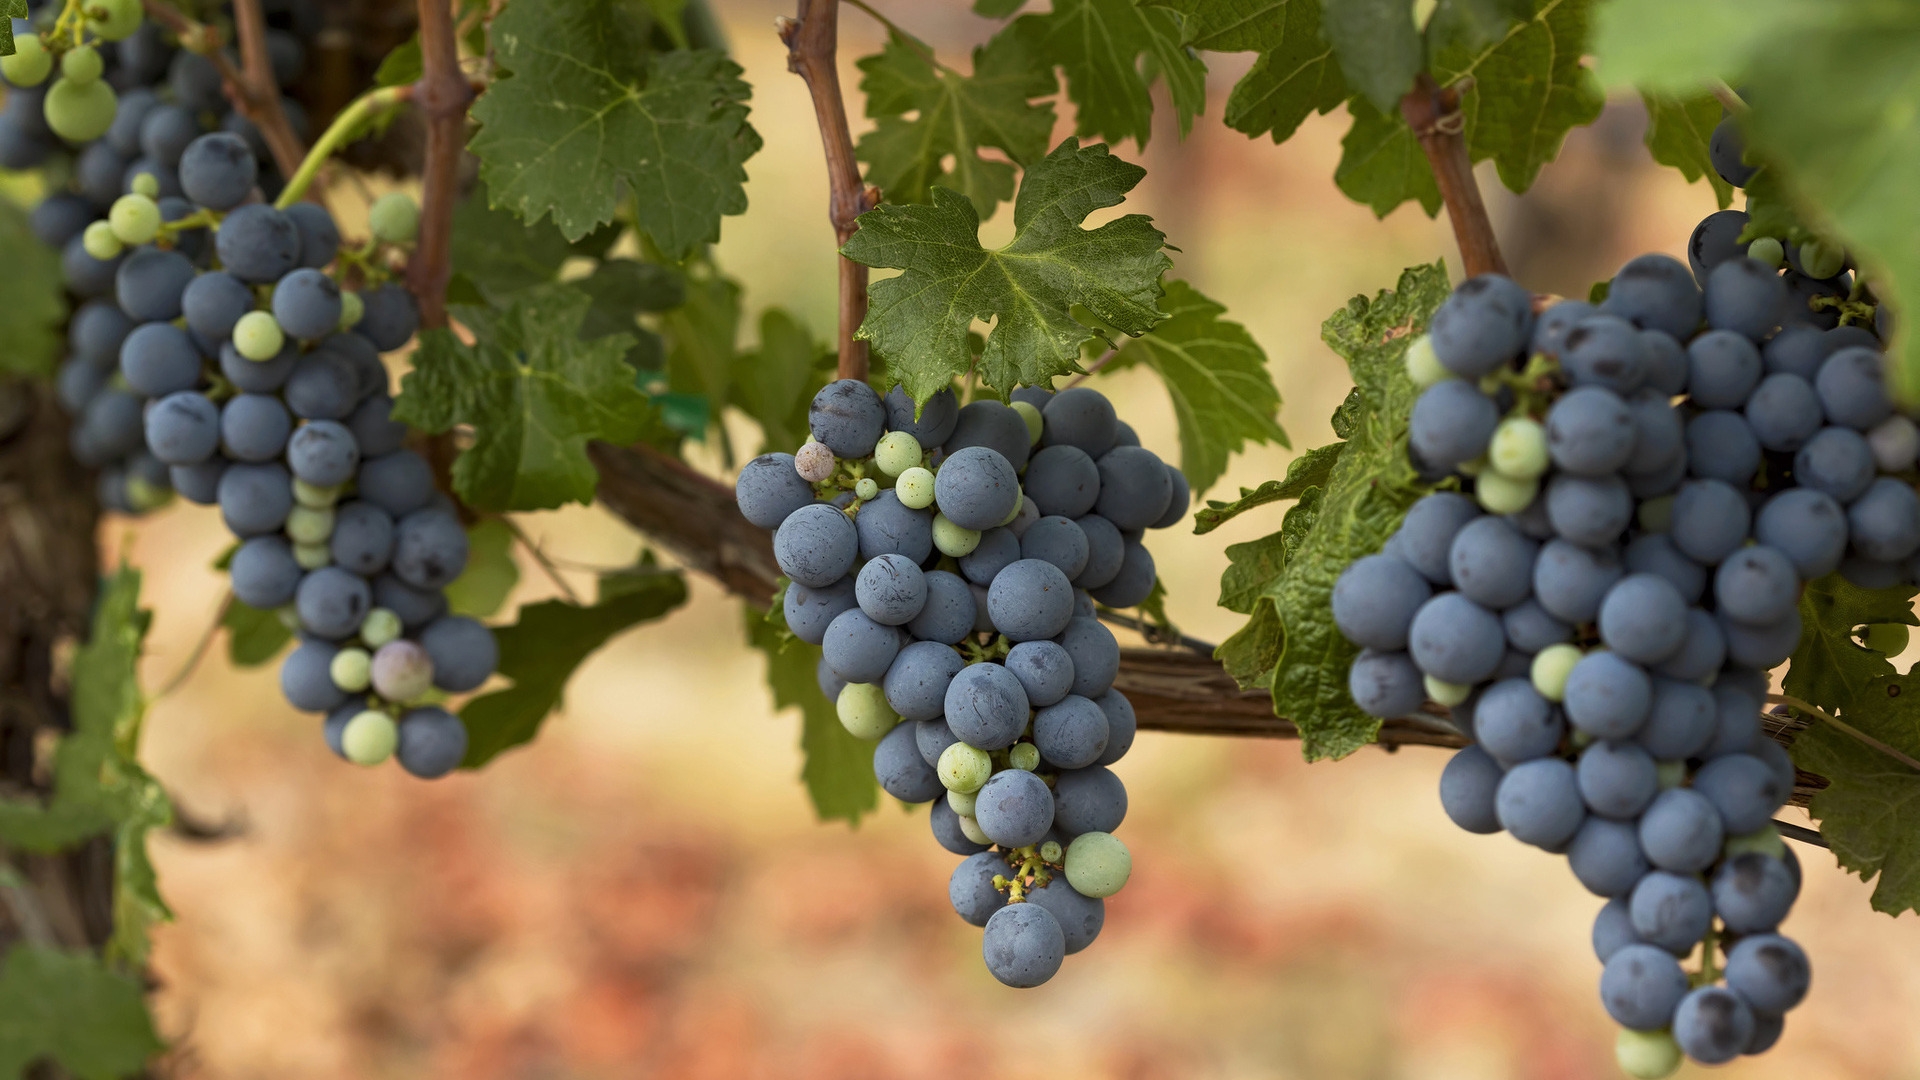 Autumn Grapes for 1920 x 1080 HDTV 1080p resolution